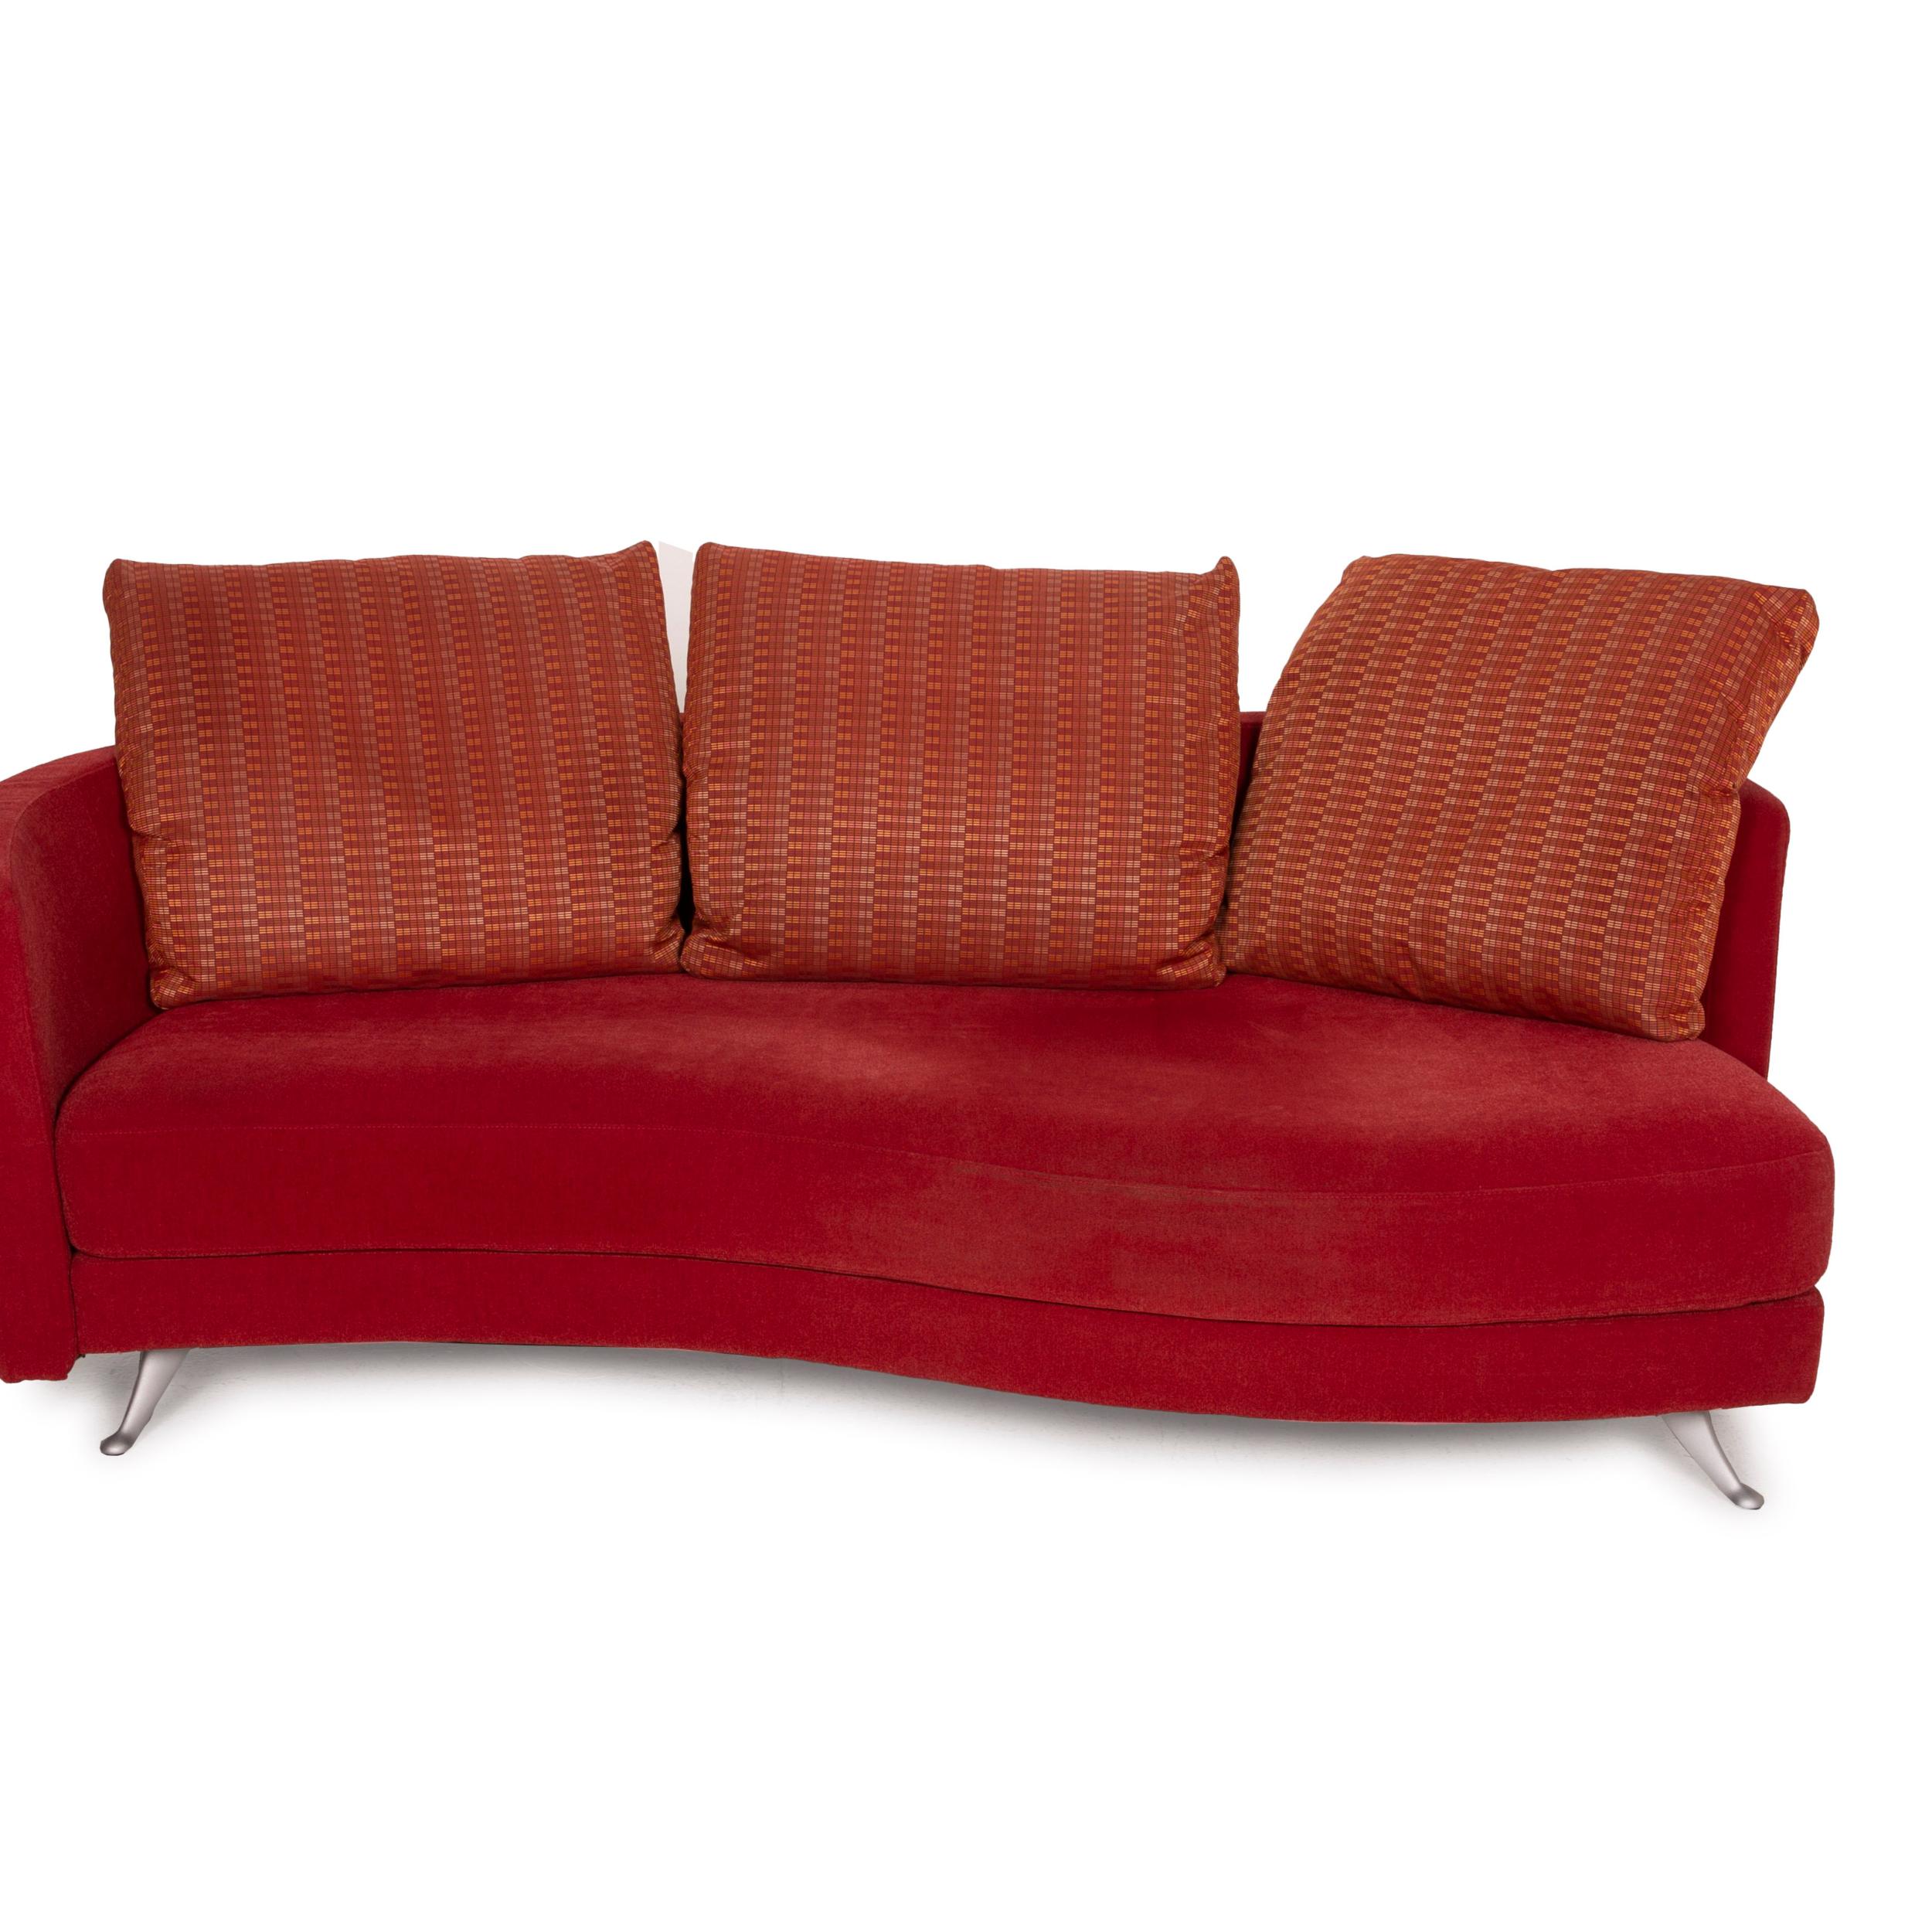 Rolf Benz 2500 Red Three-Seater Fabric Sofa Incl. Ottoman Set 1